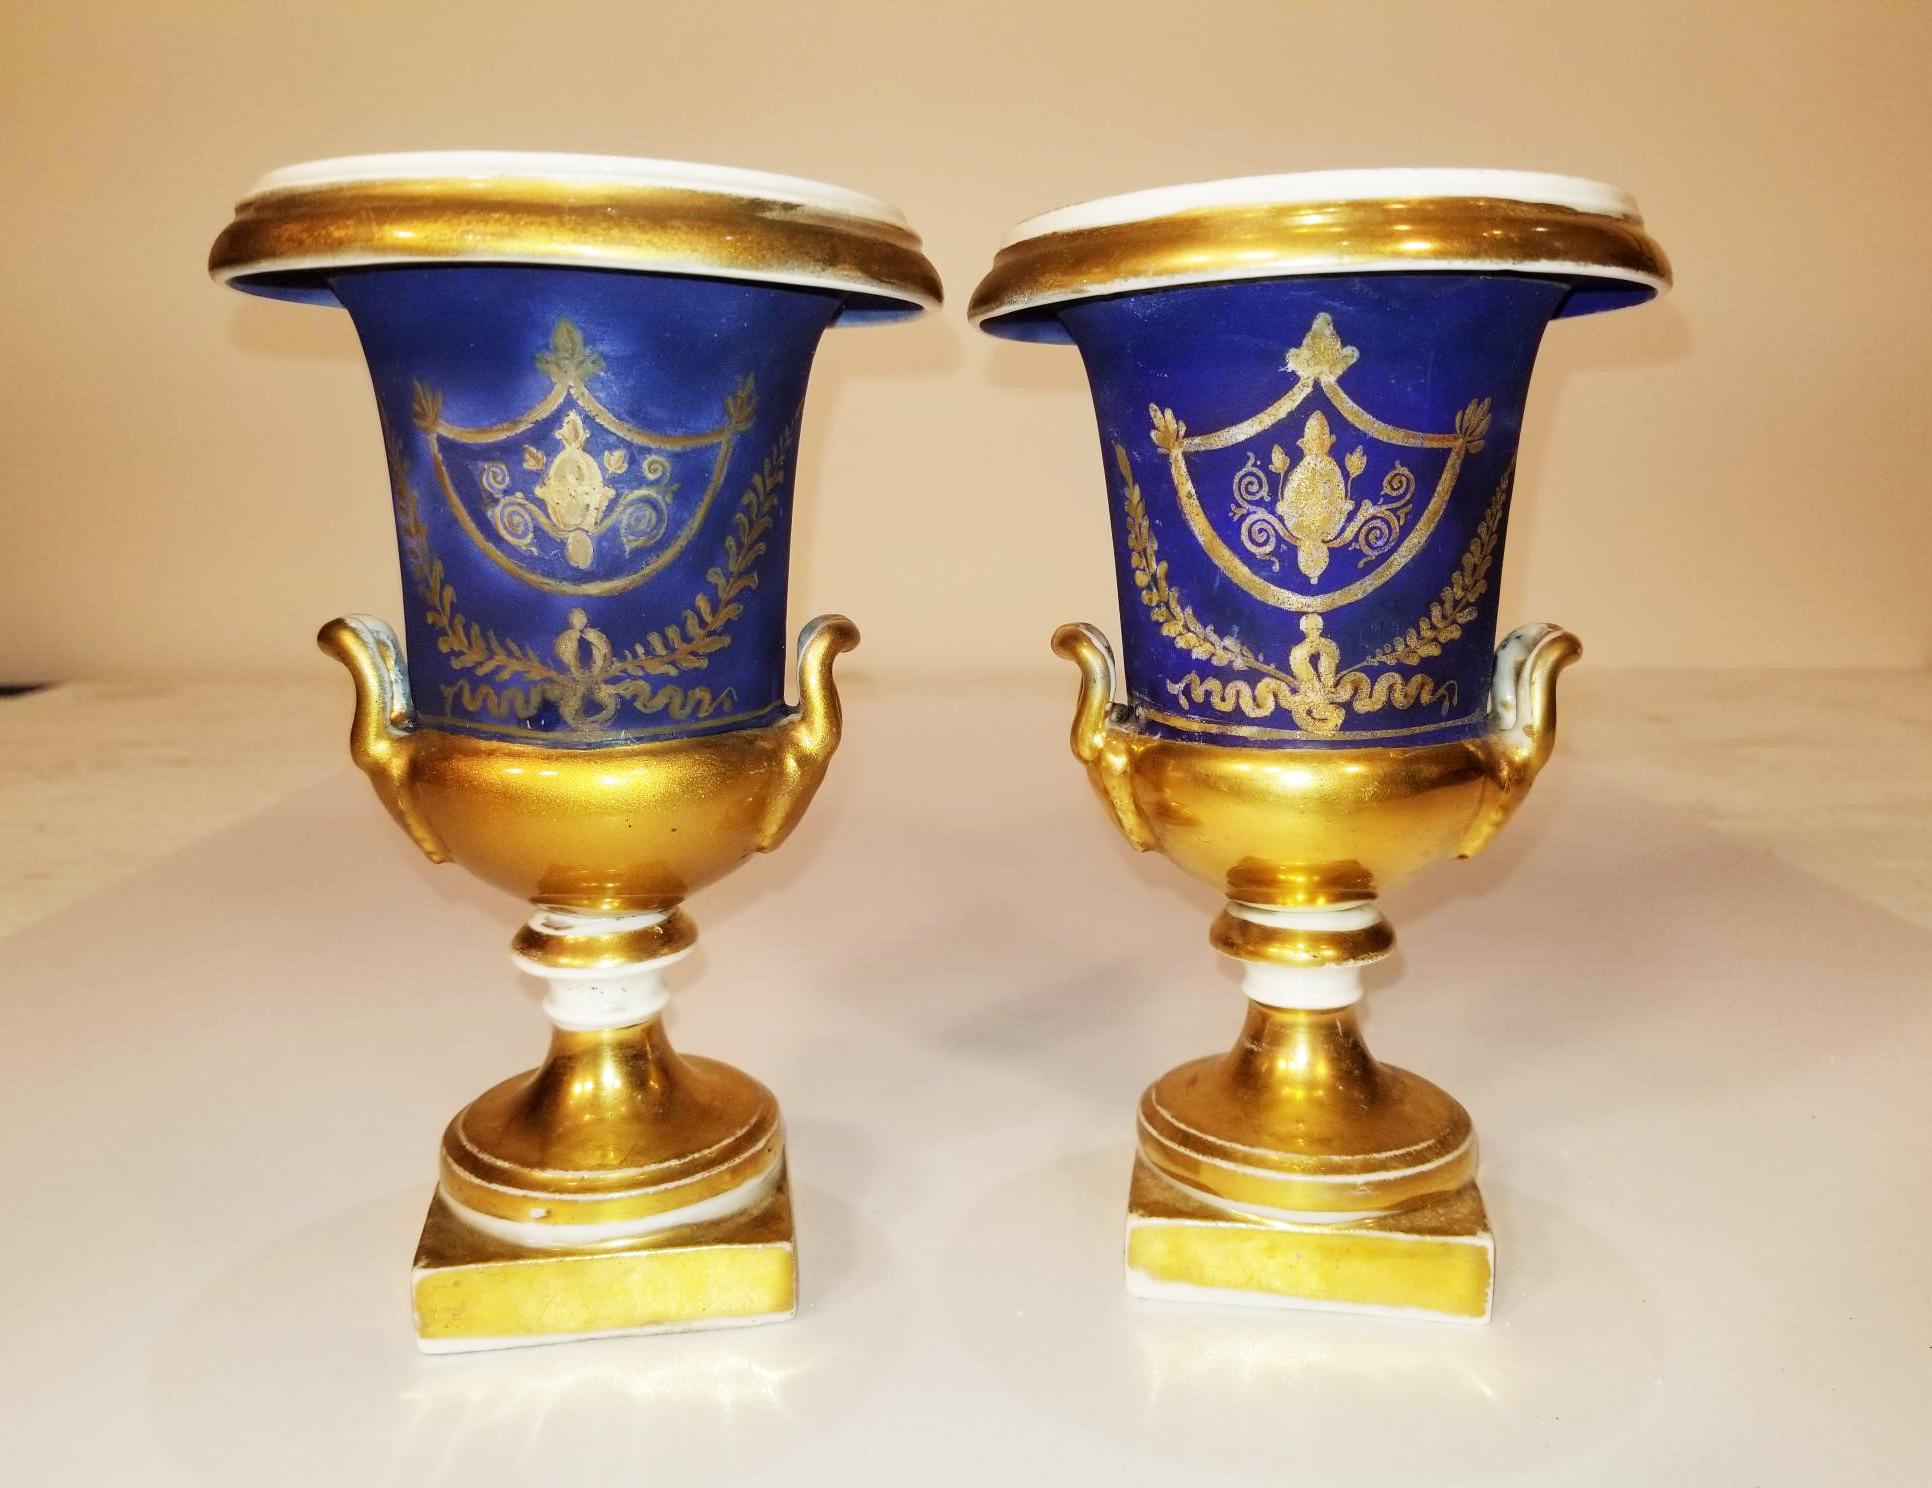 Pair of neoclassical old Paris urns, circa 1820-1840.
Minor chip at bottom of one.